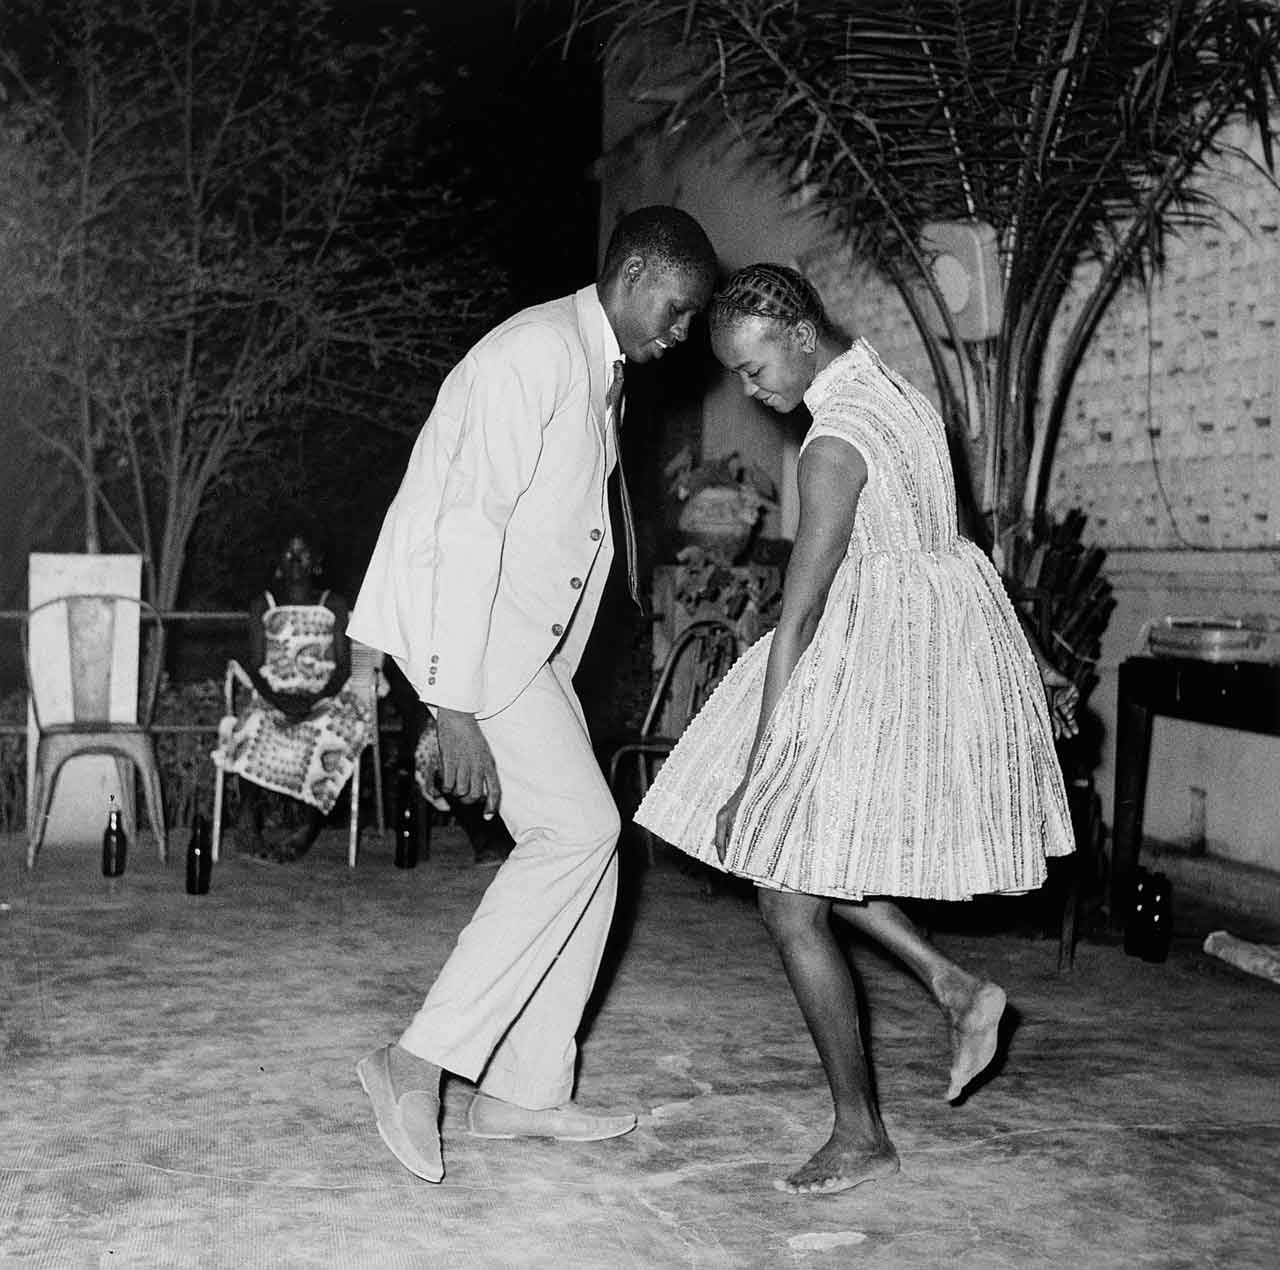 Two people dancing all dressed in white. The picture is in black and white.